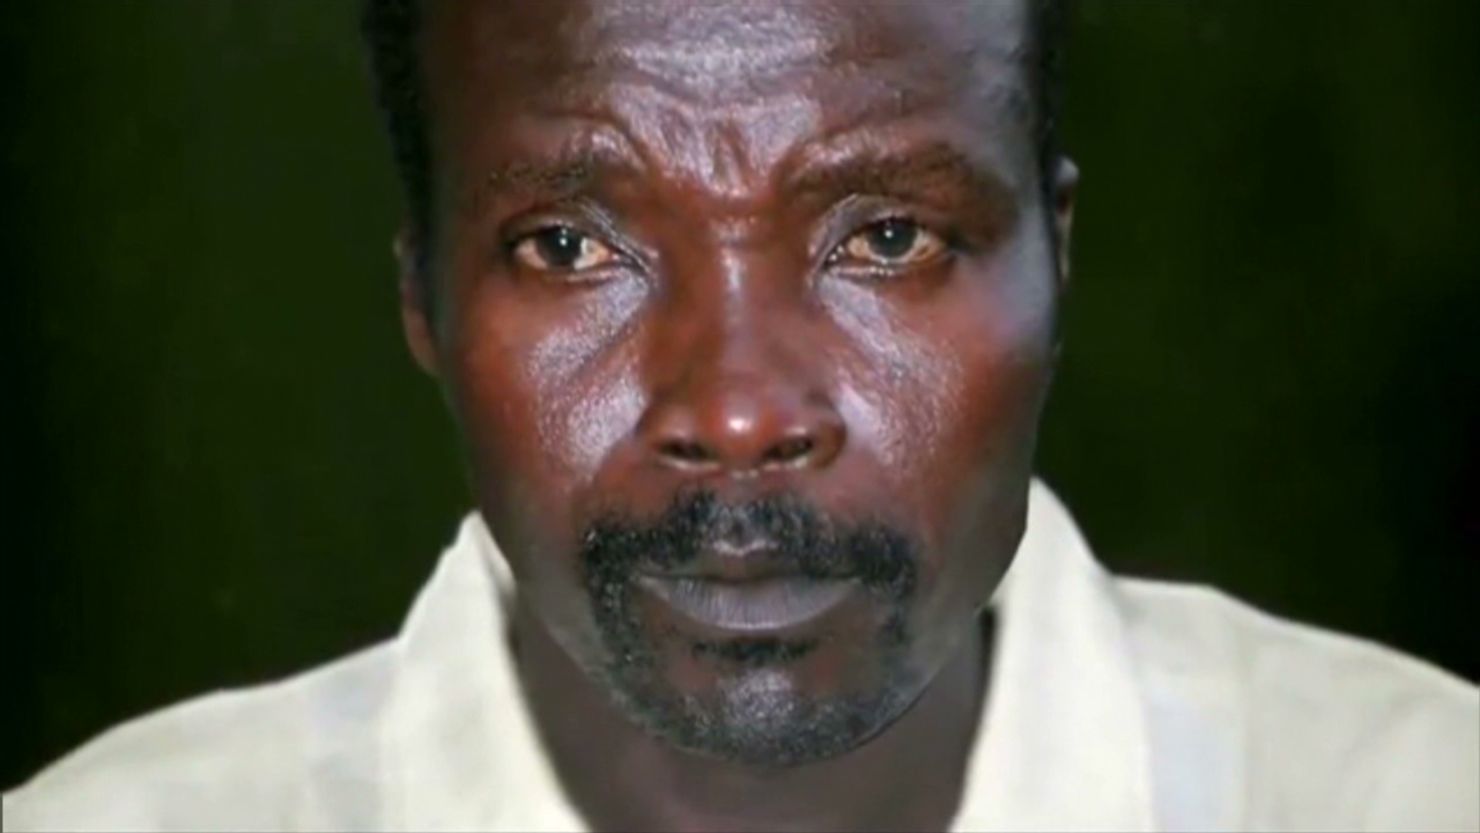 An image of notorious warlord and LRA founder Joseph Kony who has terrorized Africans for 26 years.